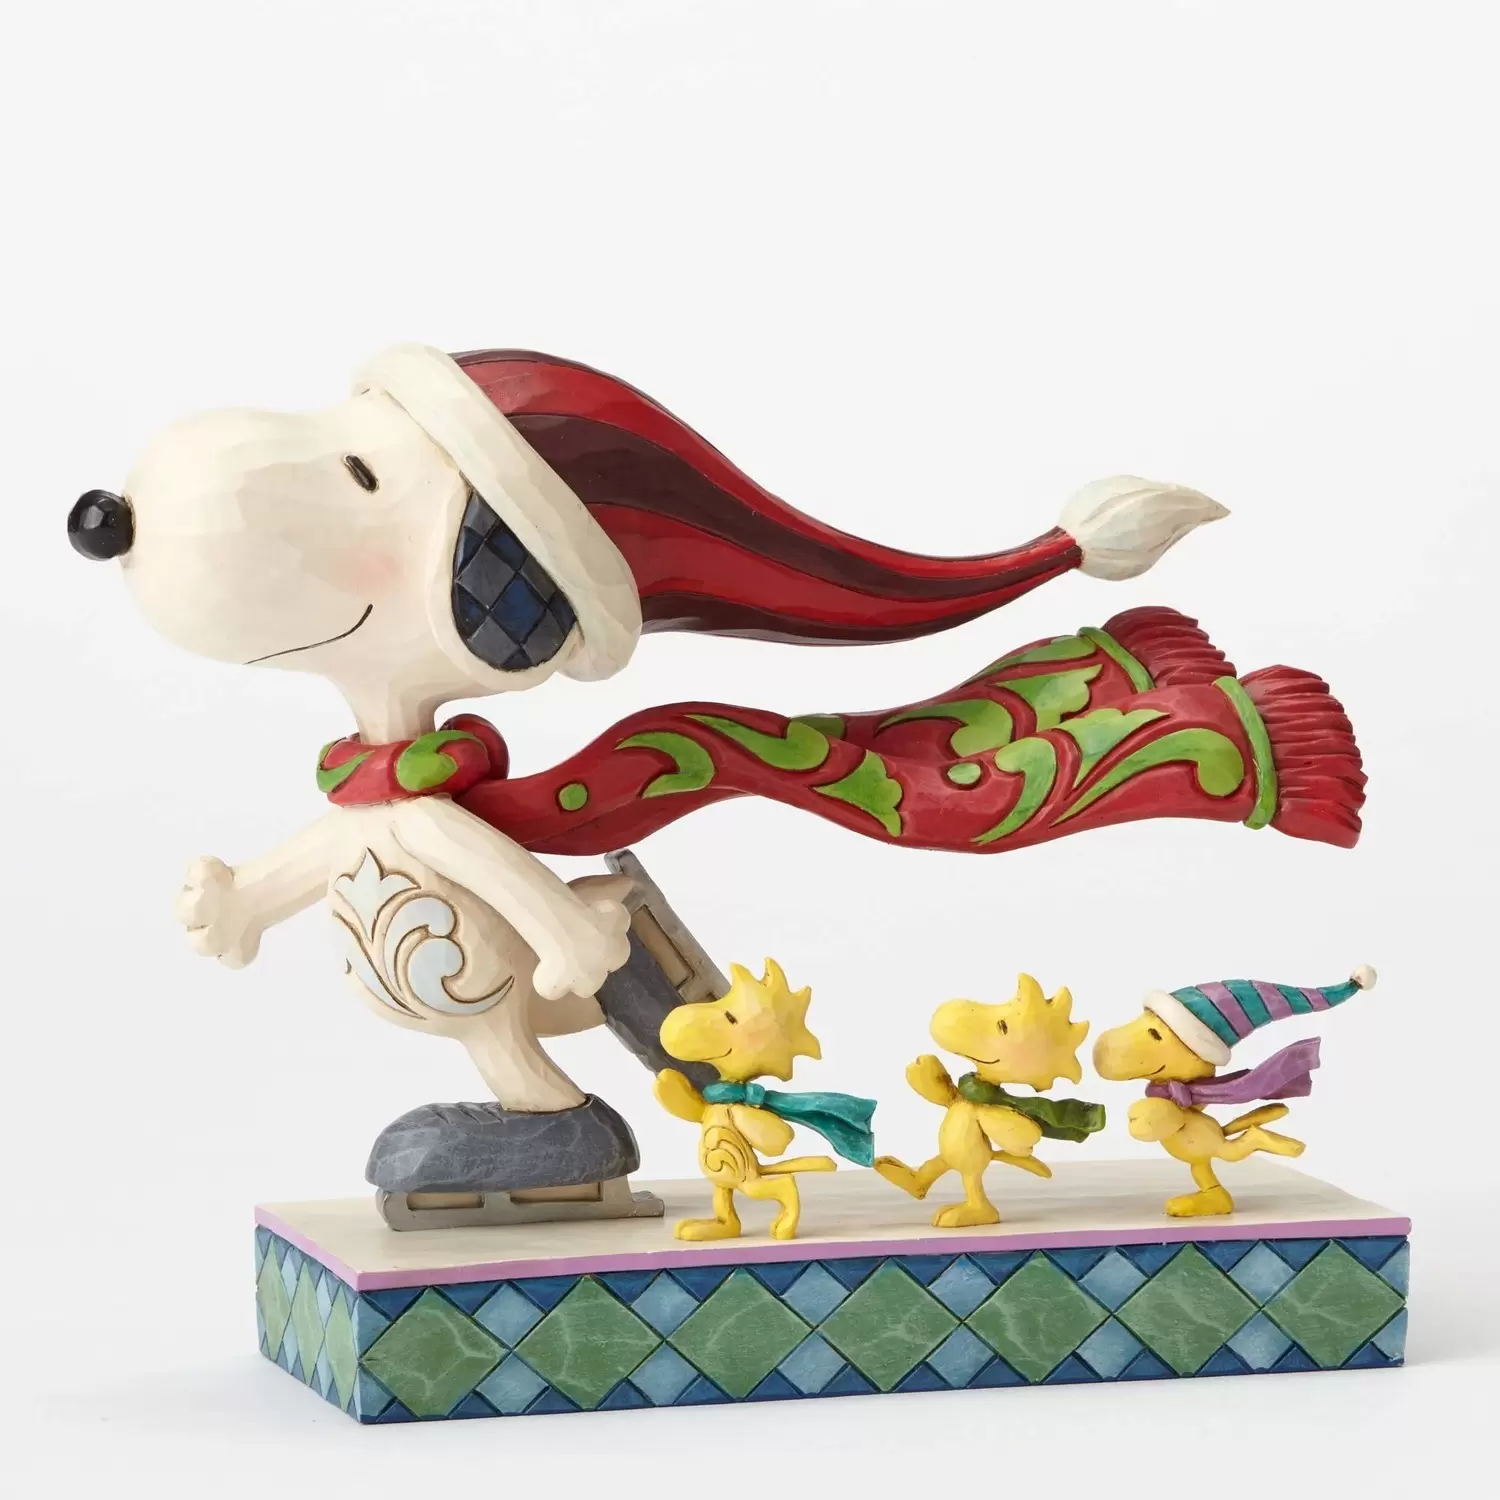 Peanuts - Jim Shore - Skate Mates - Ice Skating Snoopy with Friends